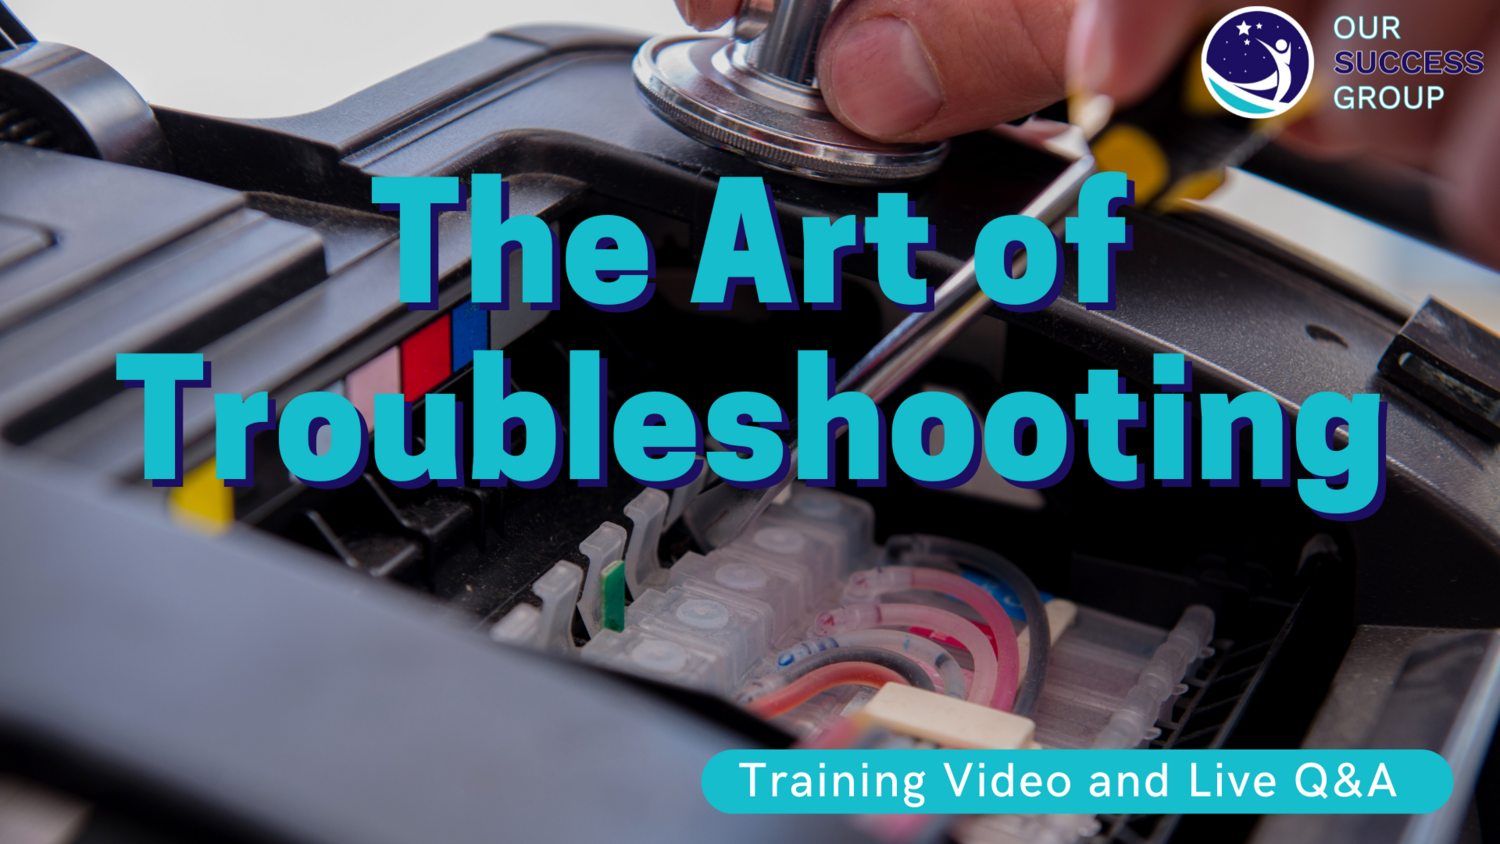 The Art of Troubleshooting